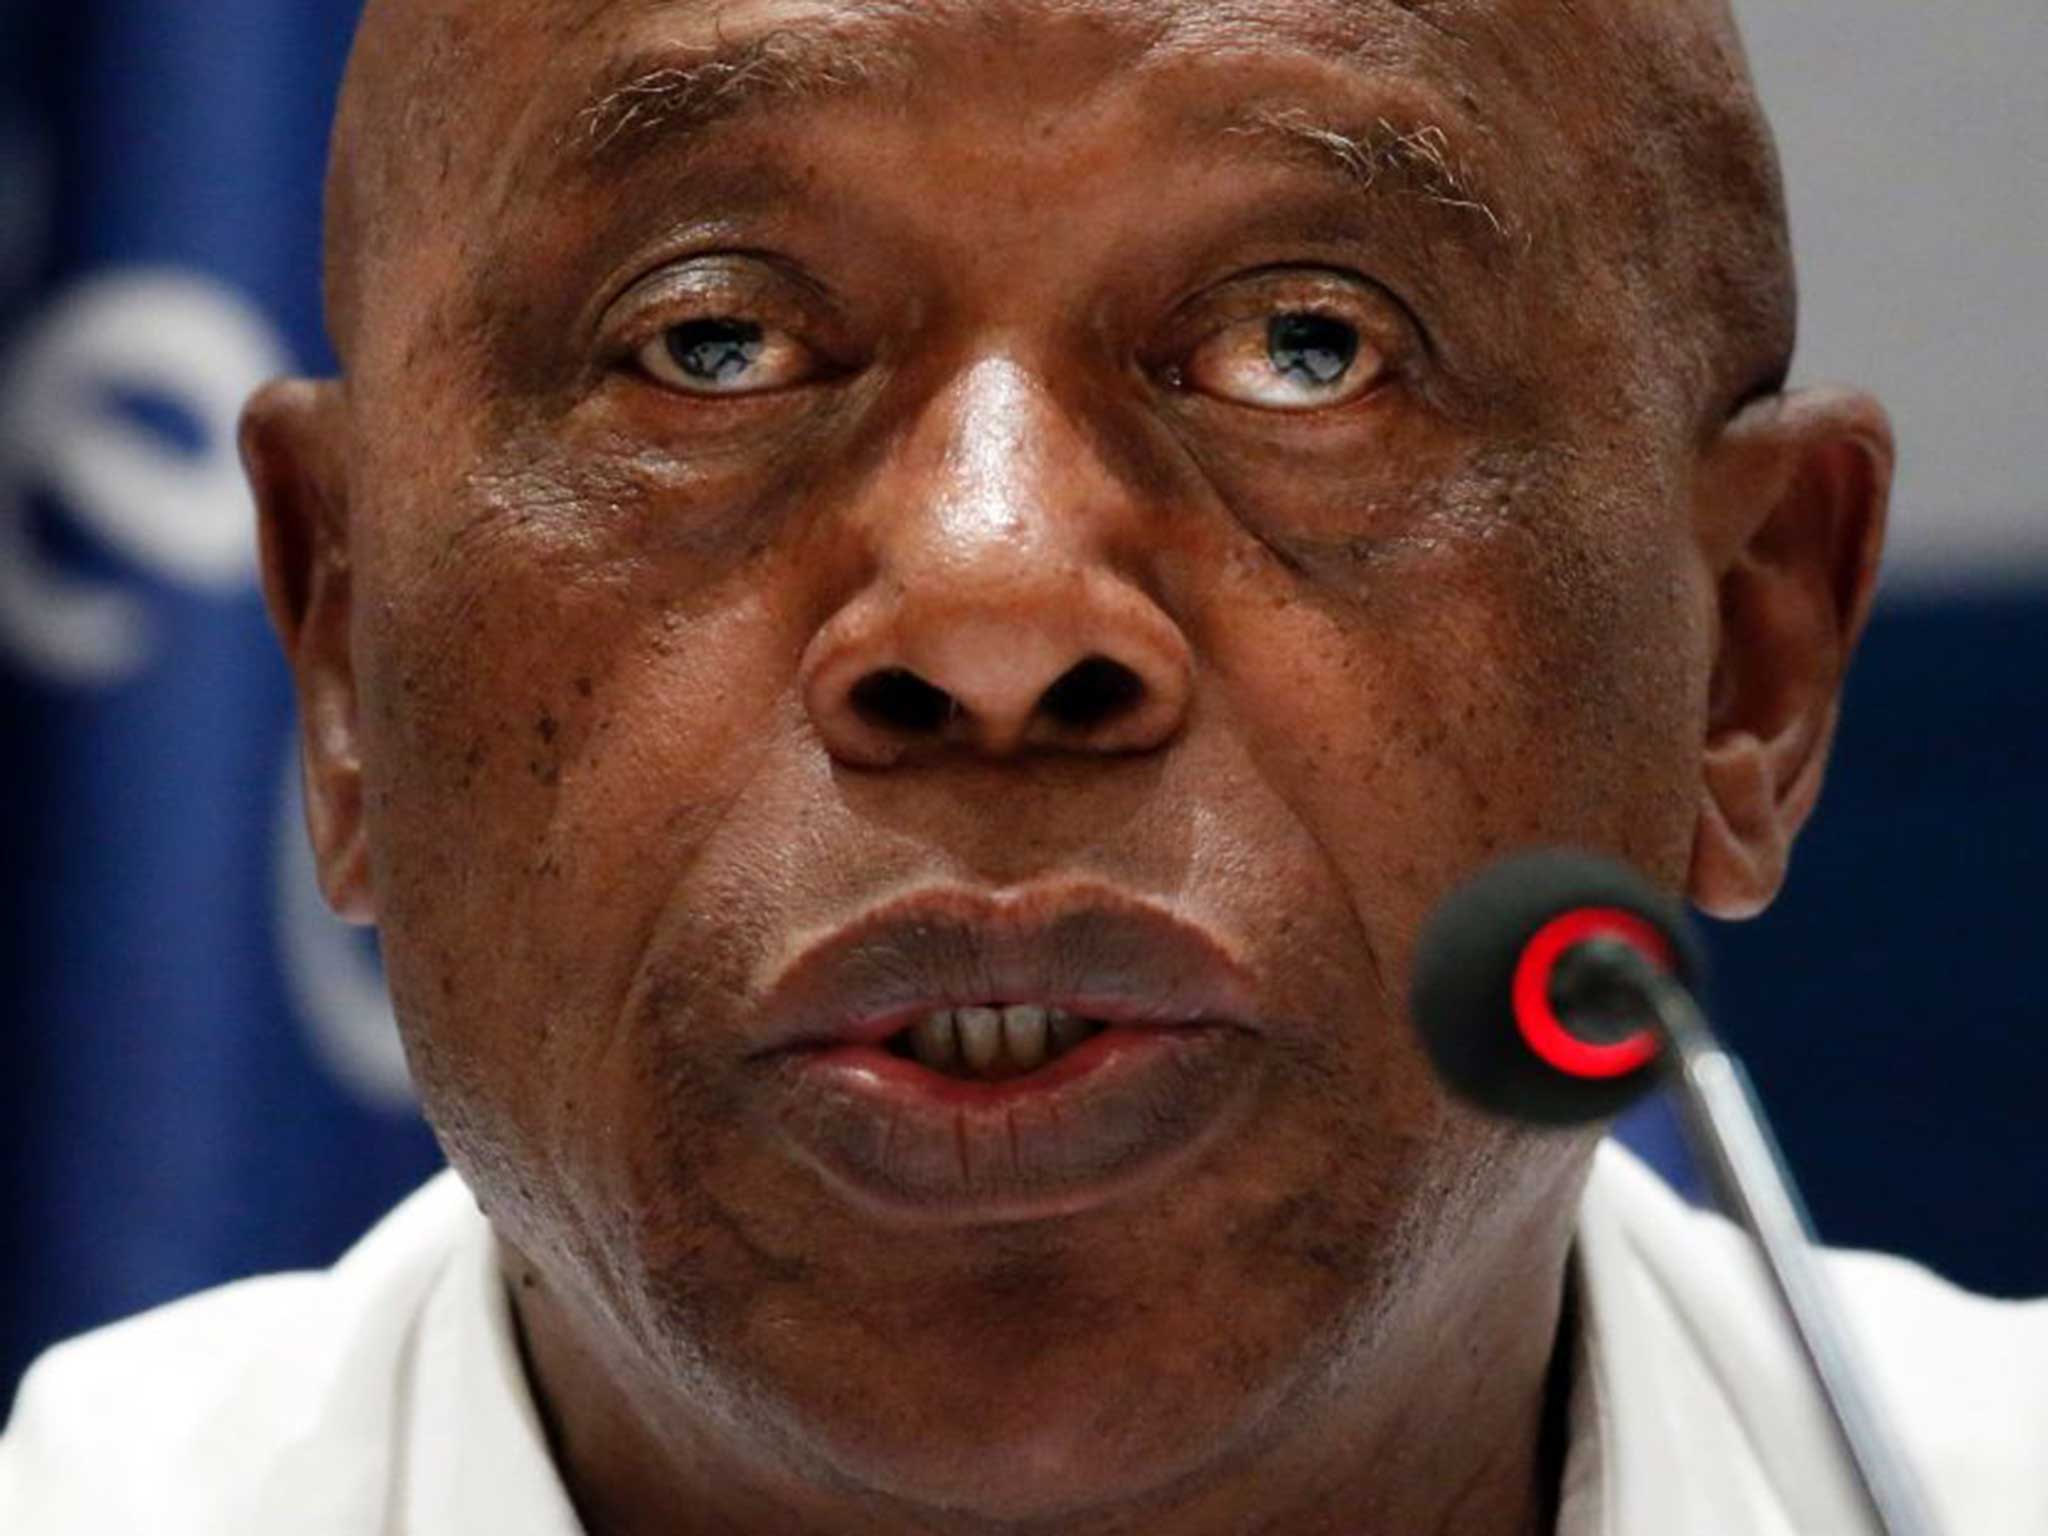 Fifa candidate Tokyo Sexwale did not respond to requests to take a stance on human rights concerns